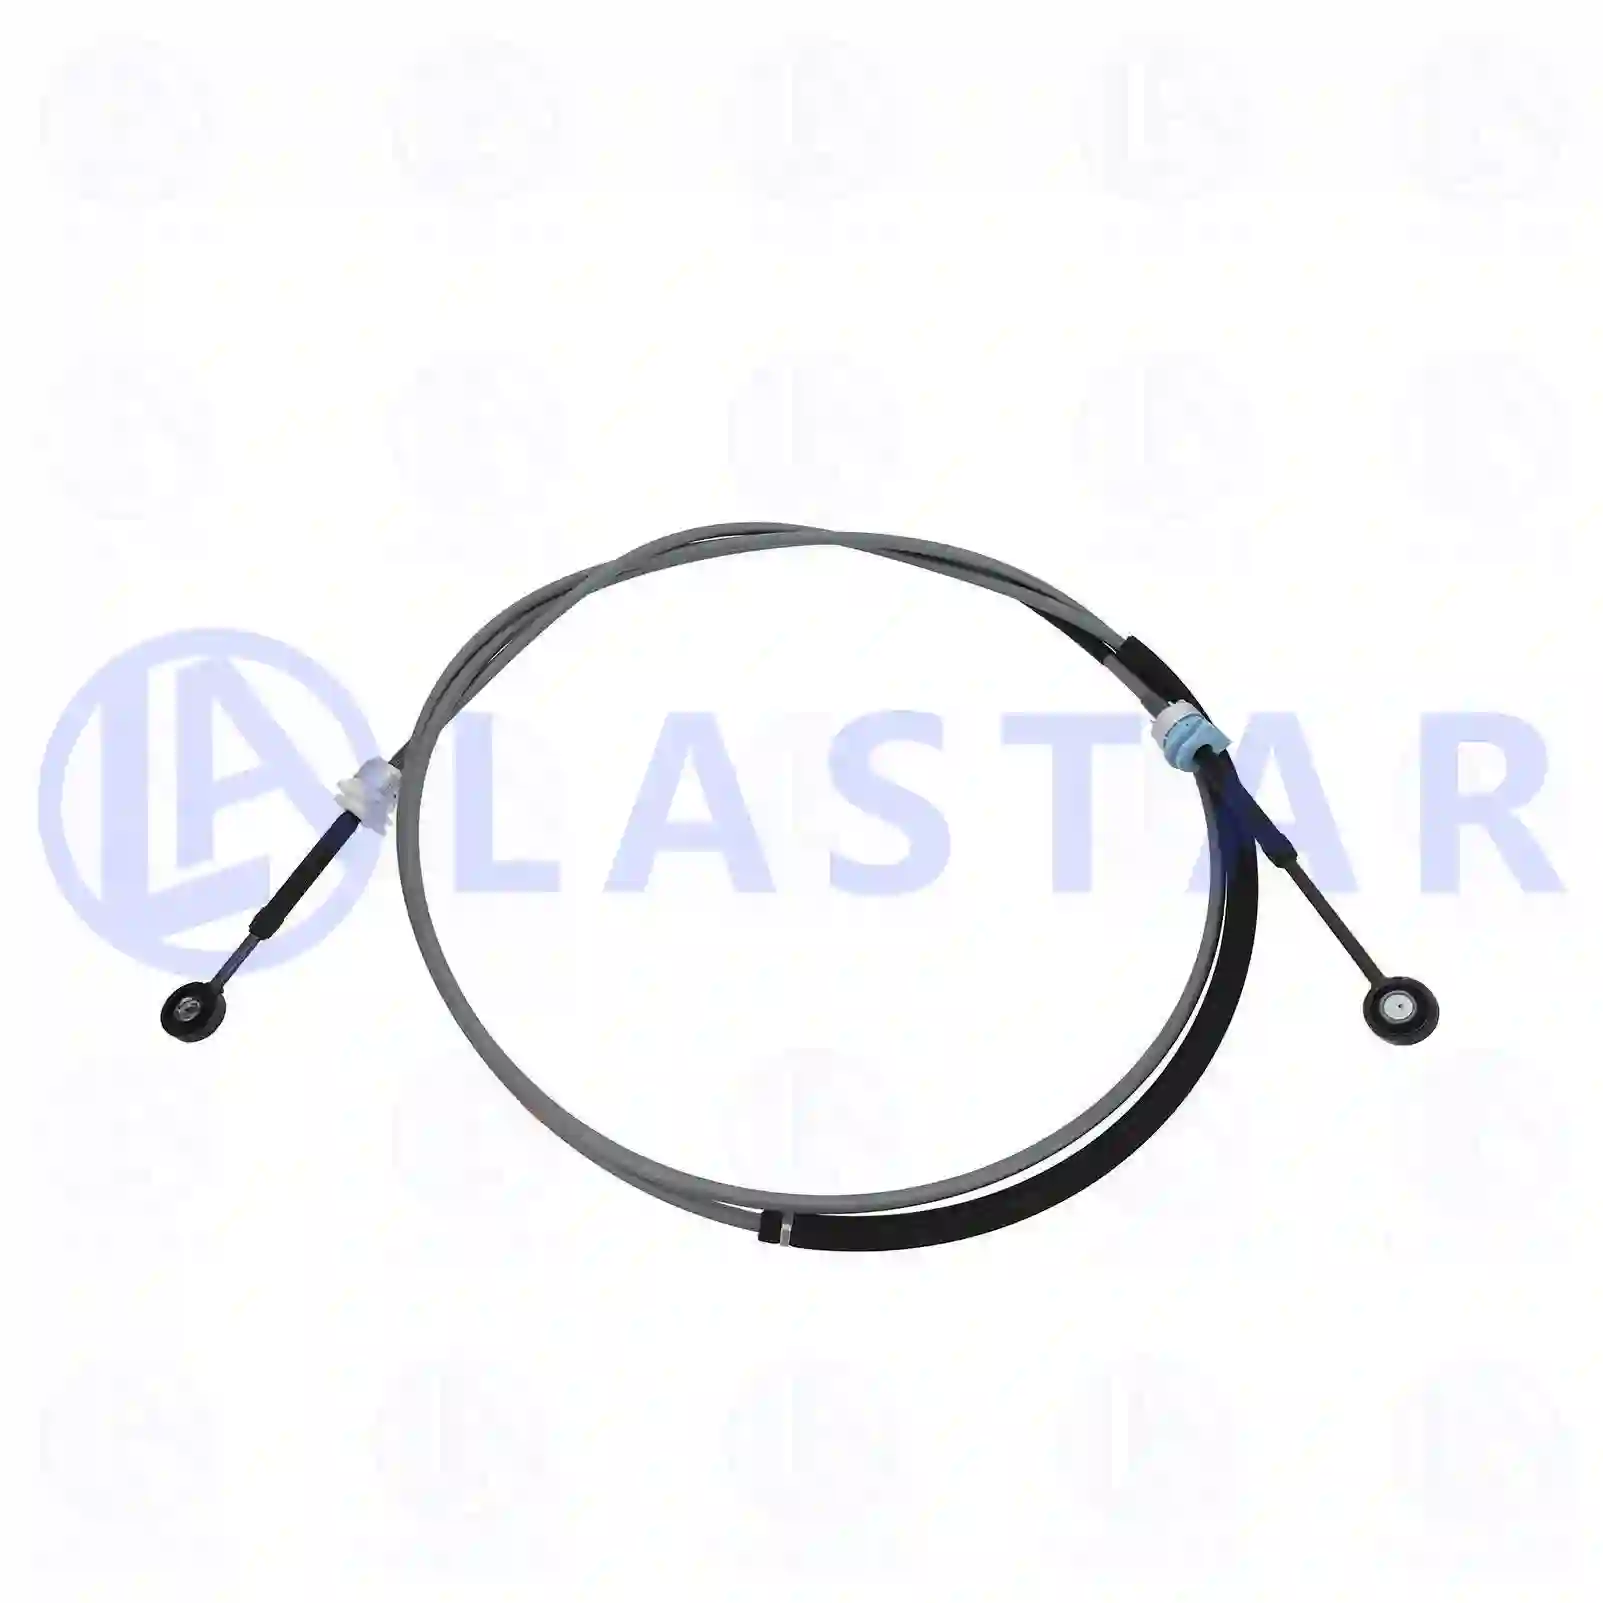 Control cable, switching, 77732694, 21002877, 21343577, 21789705 ||  77732694 Lastar Spare Part | Truck Spare Parts, Auotomotive Spare Parts Control cable, switching, 77732694, 21002877, 21343577, 21789705 ||  77732694 Lastar Spare Part | Truck Spare Parts, Auotomotive Spare Parts